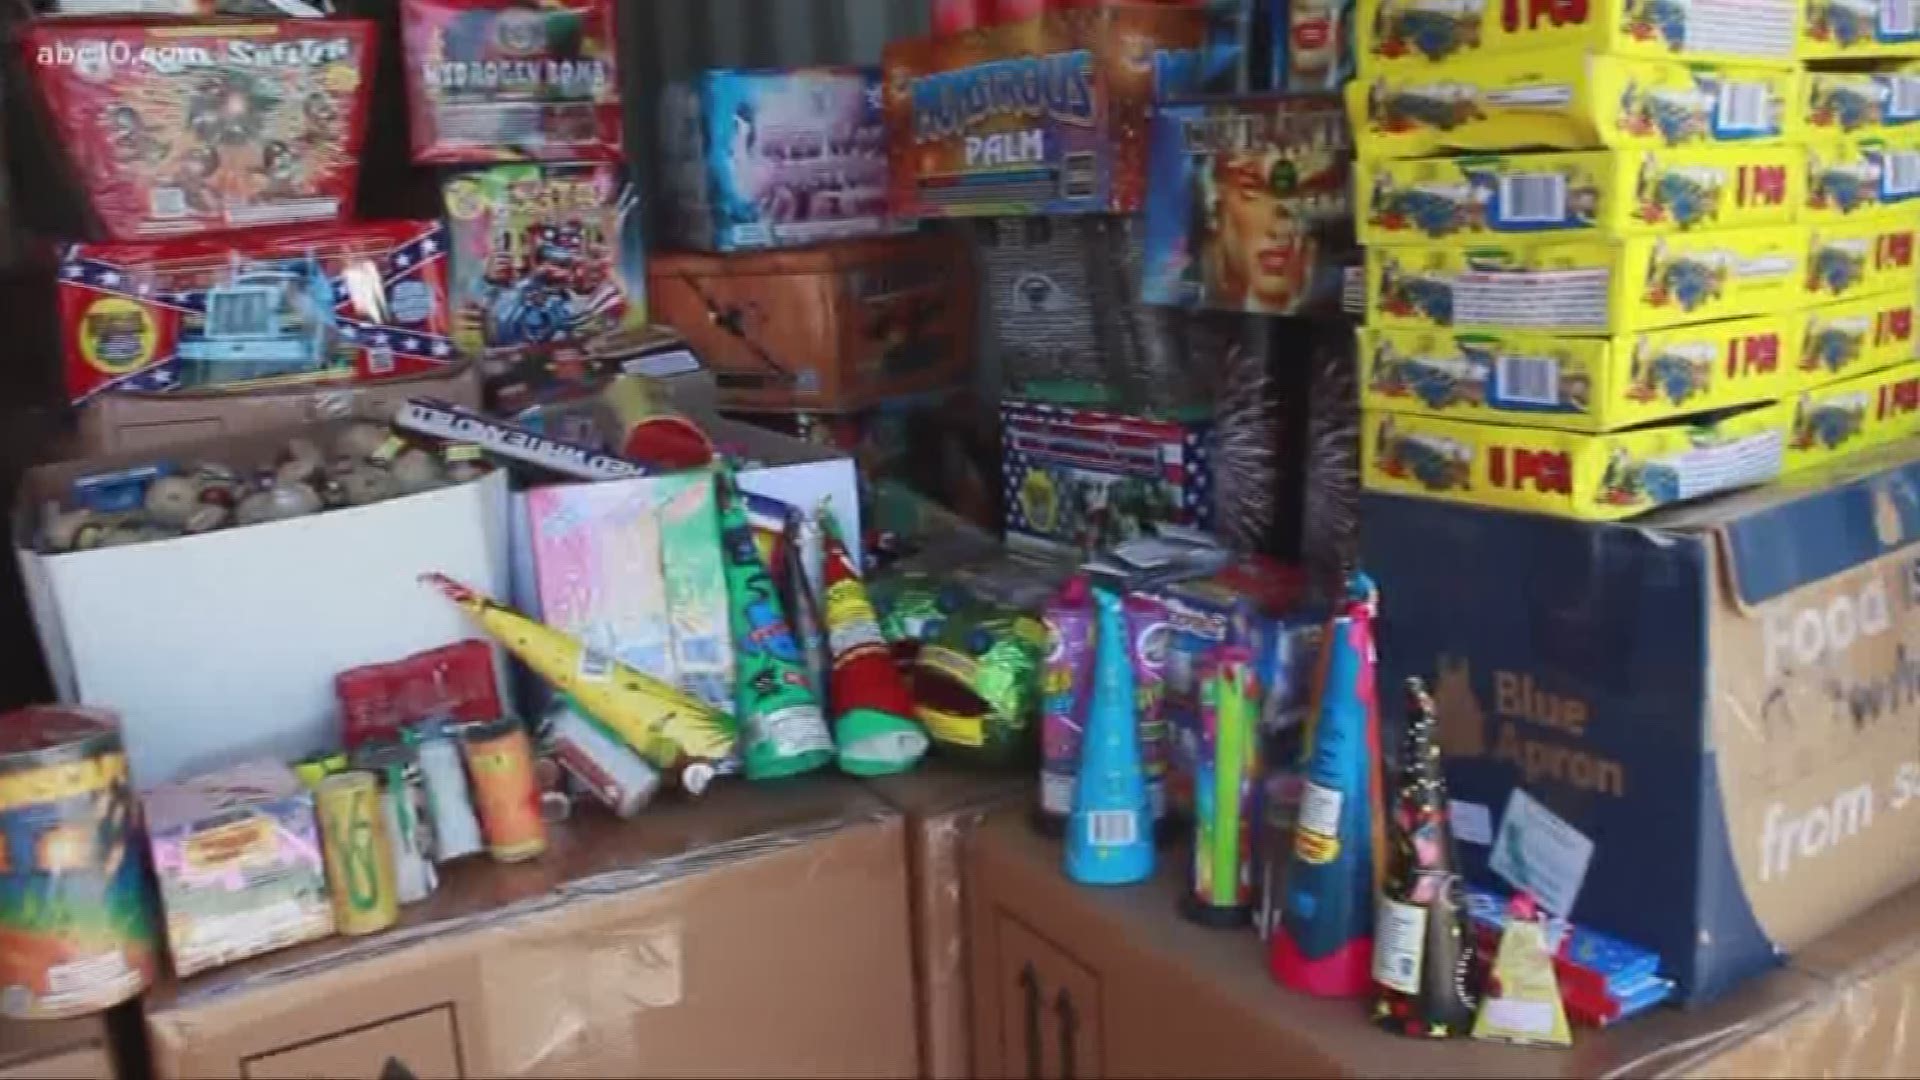 Sacramento police will have their eyes for illegal fireworks as the 4th of July approaches. This year, they'll be watching from the sky as well to make sure fireworks are "safe and sane."